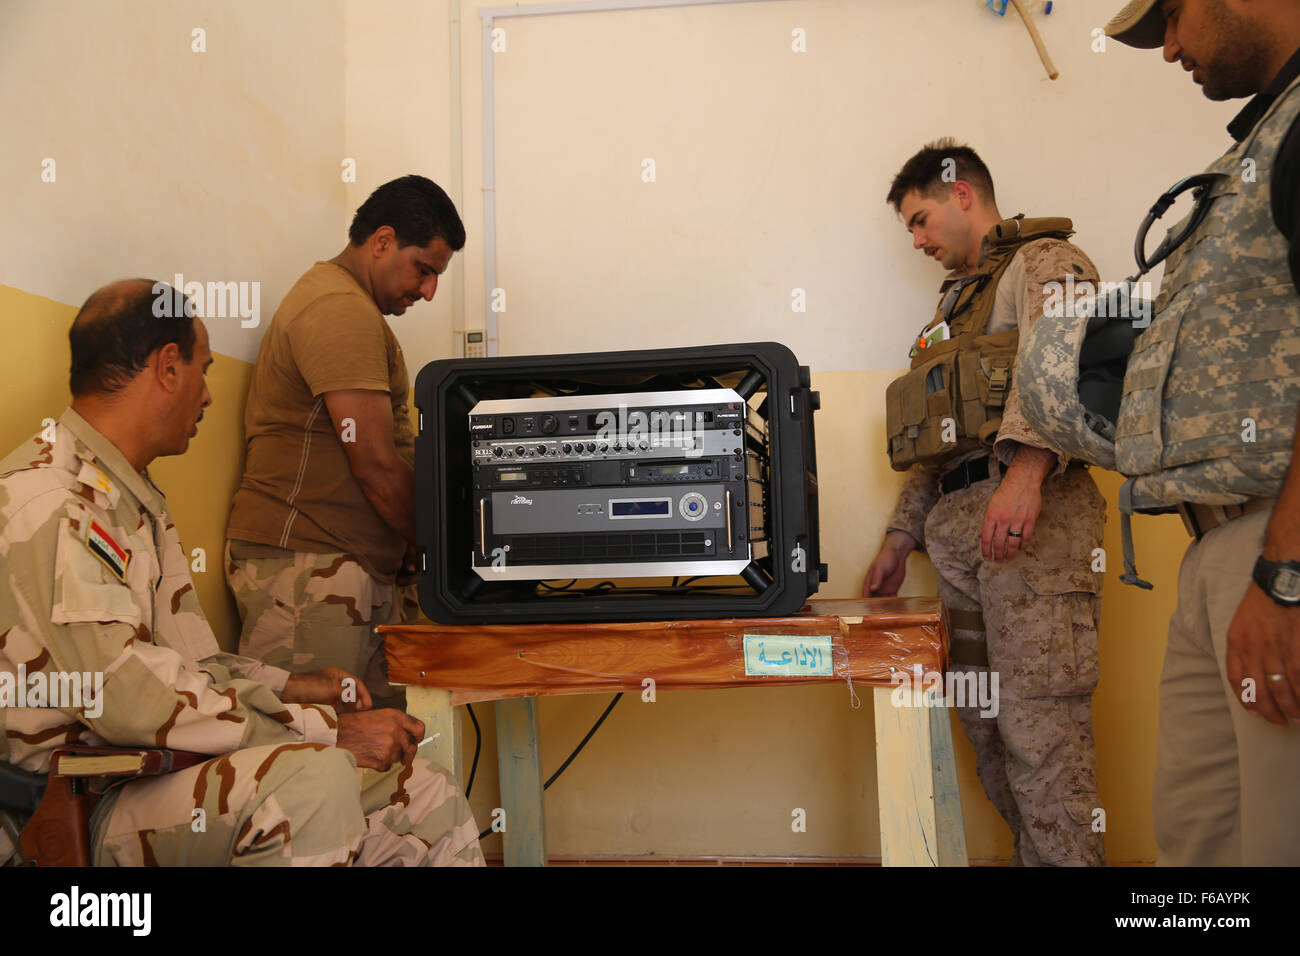 U.S. Marine Staff Sgt. Eric Alabiso, right, a military information operations advisor with Task Force Al Asad, helps an Iraqi soldier with the 7th Iraqi Army Division set up a Radio in a Box (RIAB) at Al Asad Air Base, Iraq, Sept. 28, 2015. The RIAB was provided by Iraq’s Ministry of Defense through the Iraq Train and Equip Fund. The fund was established by Combined Joint Task Force – Operation Inherent Resolve (CJTF-OIR), a part of the multinational coalition force that helps improve the Iraqi military’s ability to fight against the Islamic State of Iraq and the Levant (ISIL) by providing tra Stock Photo